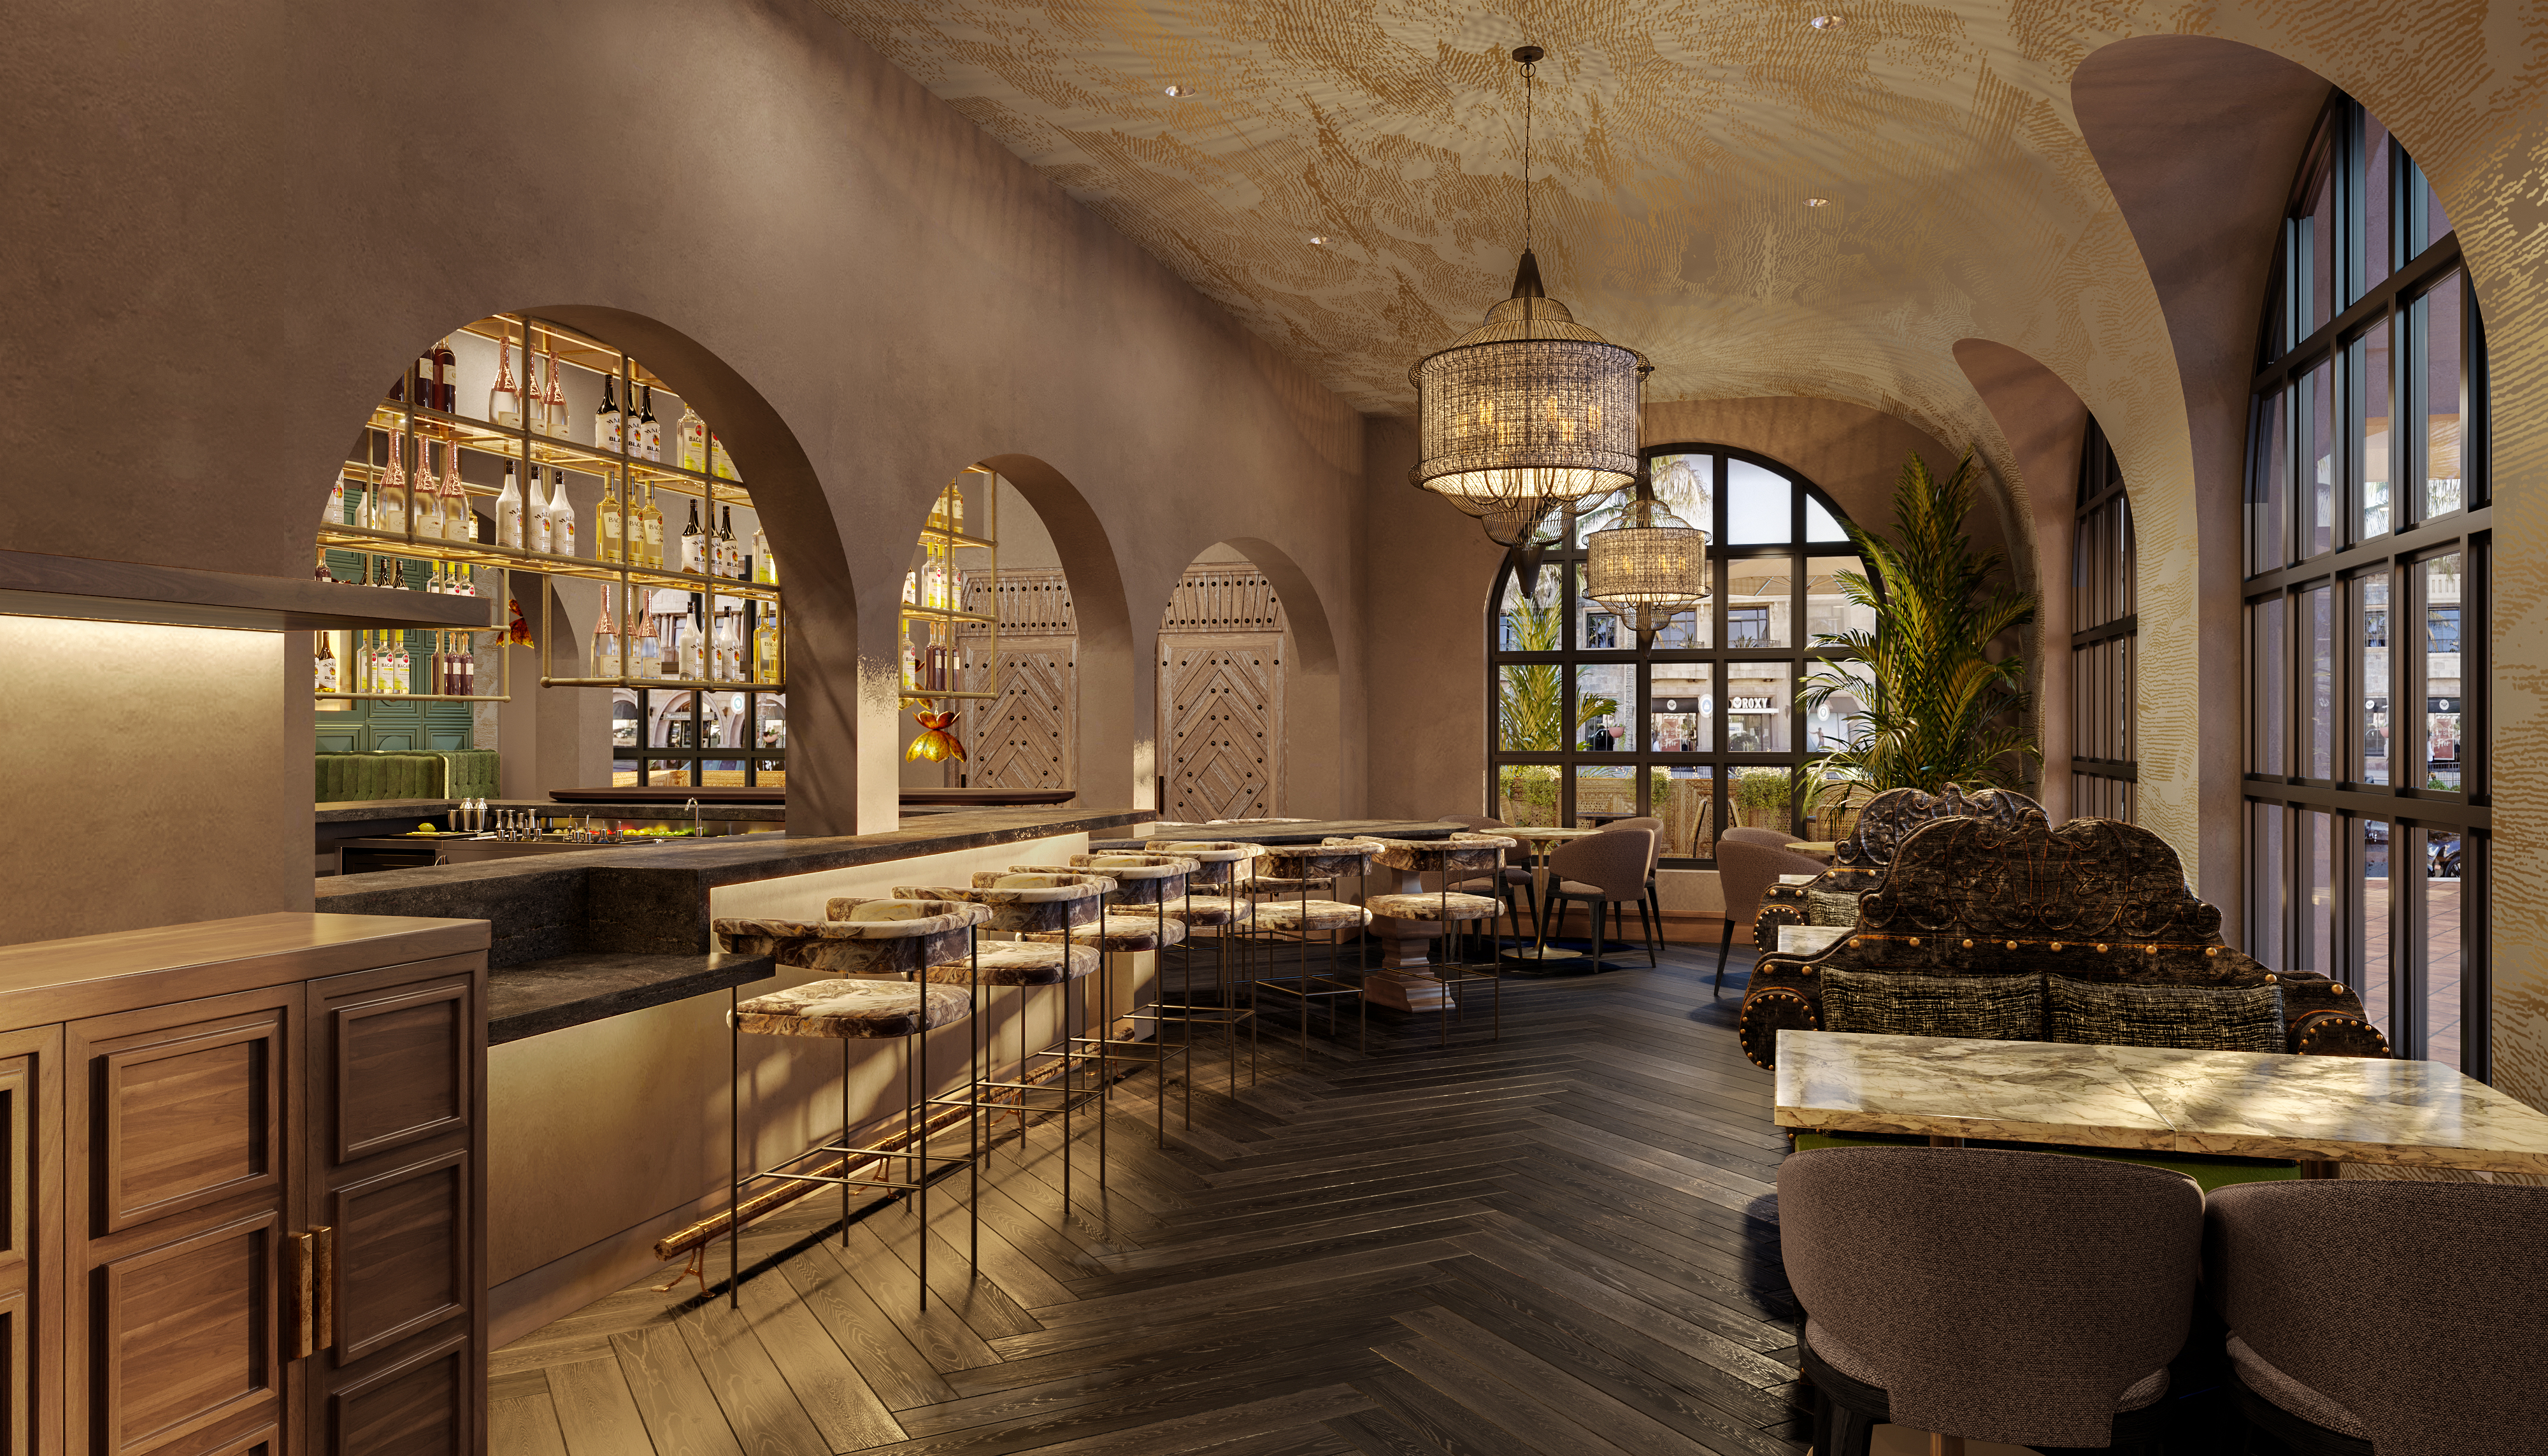 A design rendering of The Whaling Bar in the La Valencia Hotel, which is set to return later this month. (Courtesy of Schoos Design)